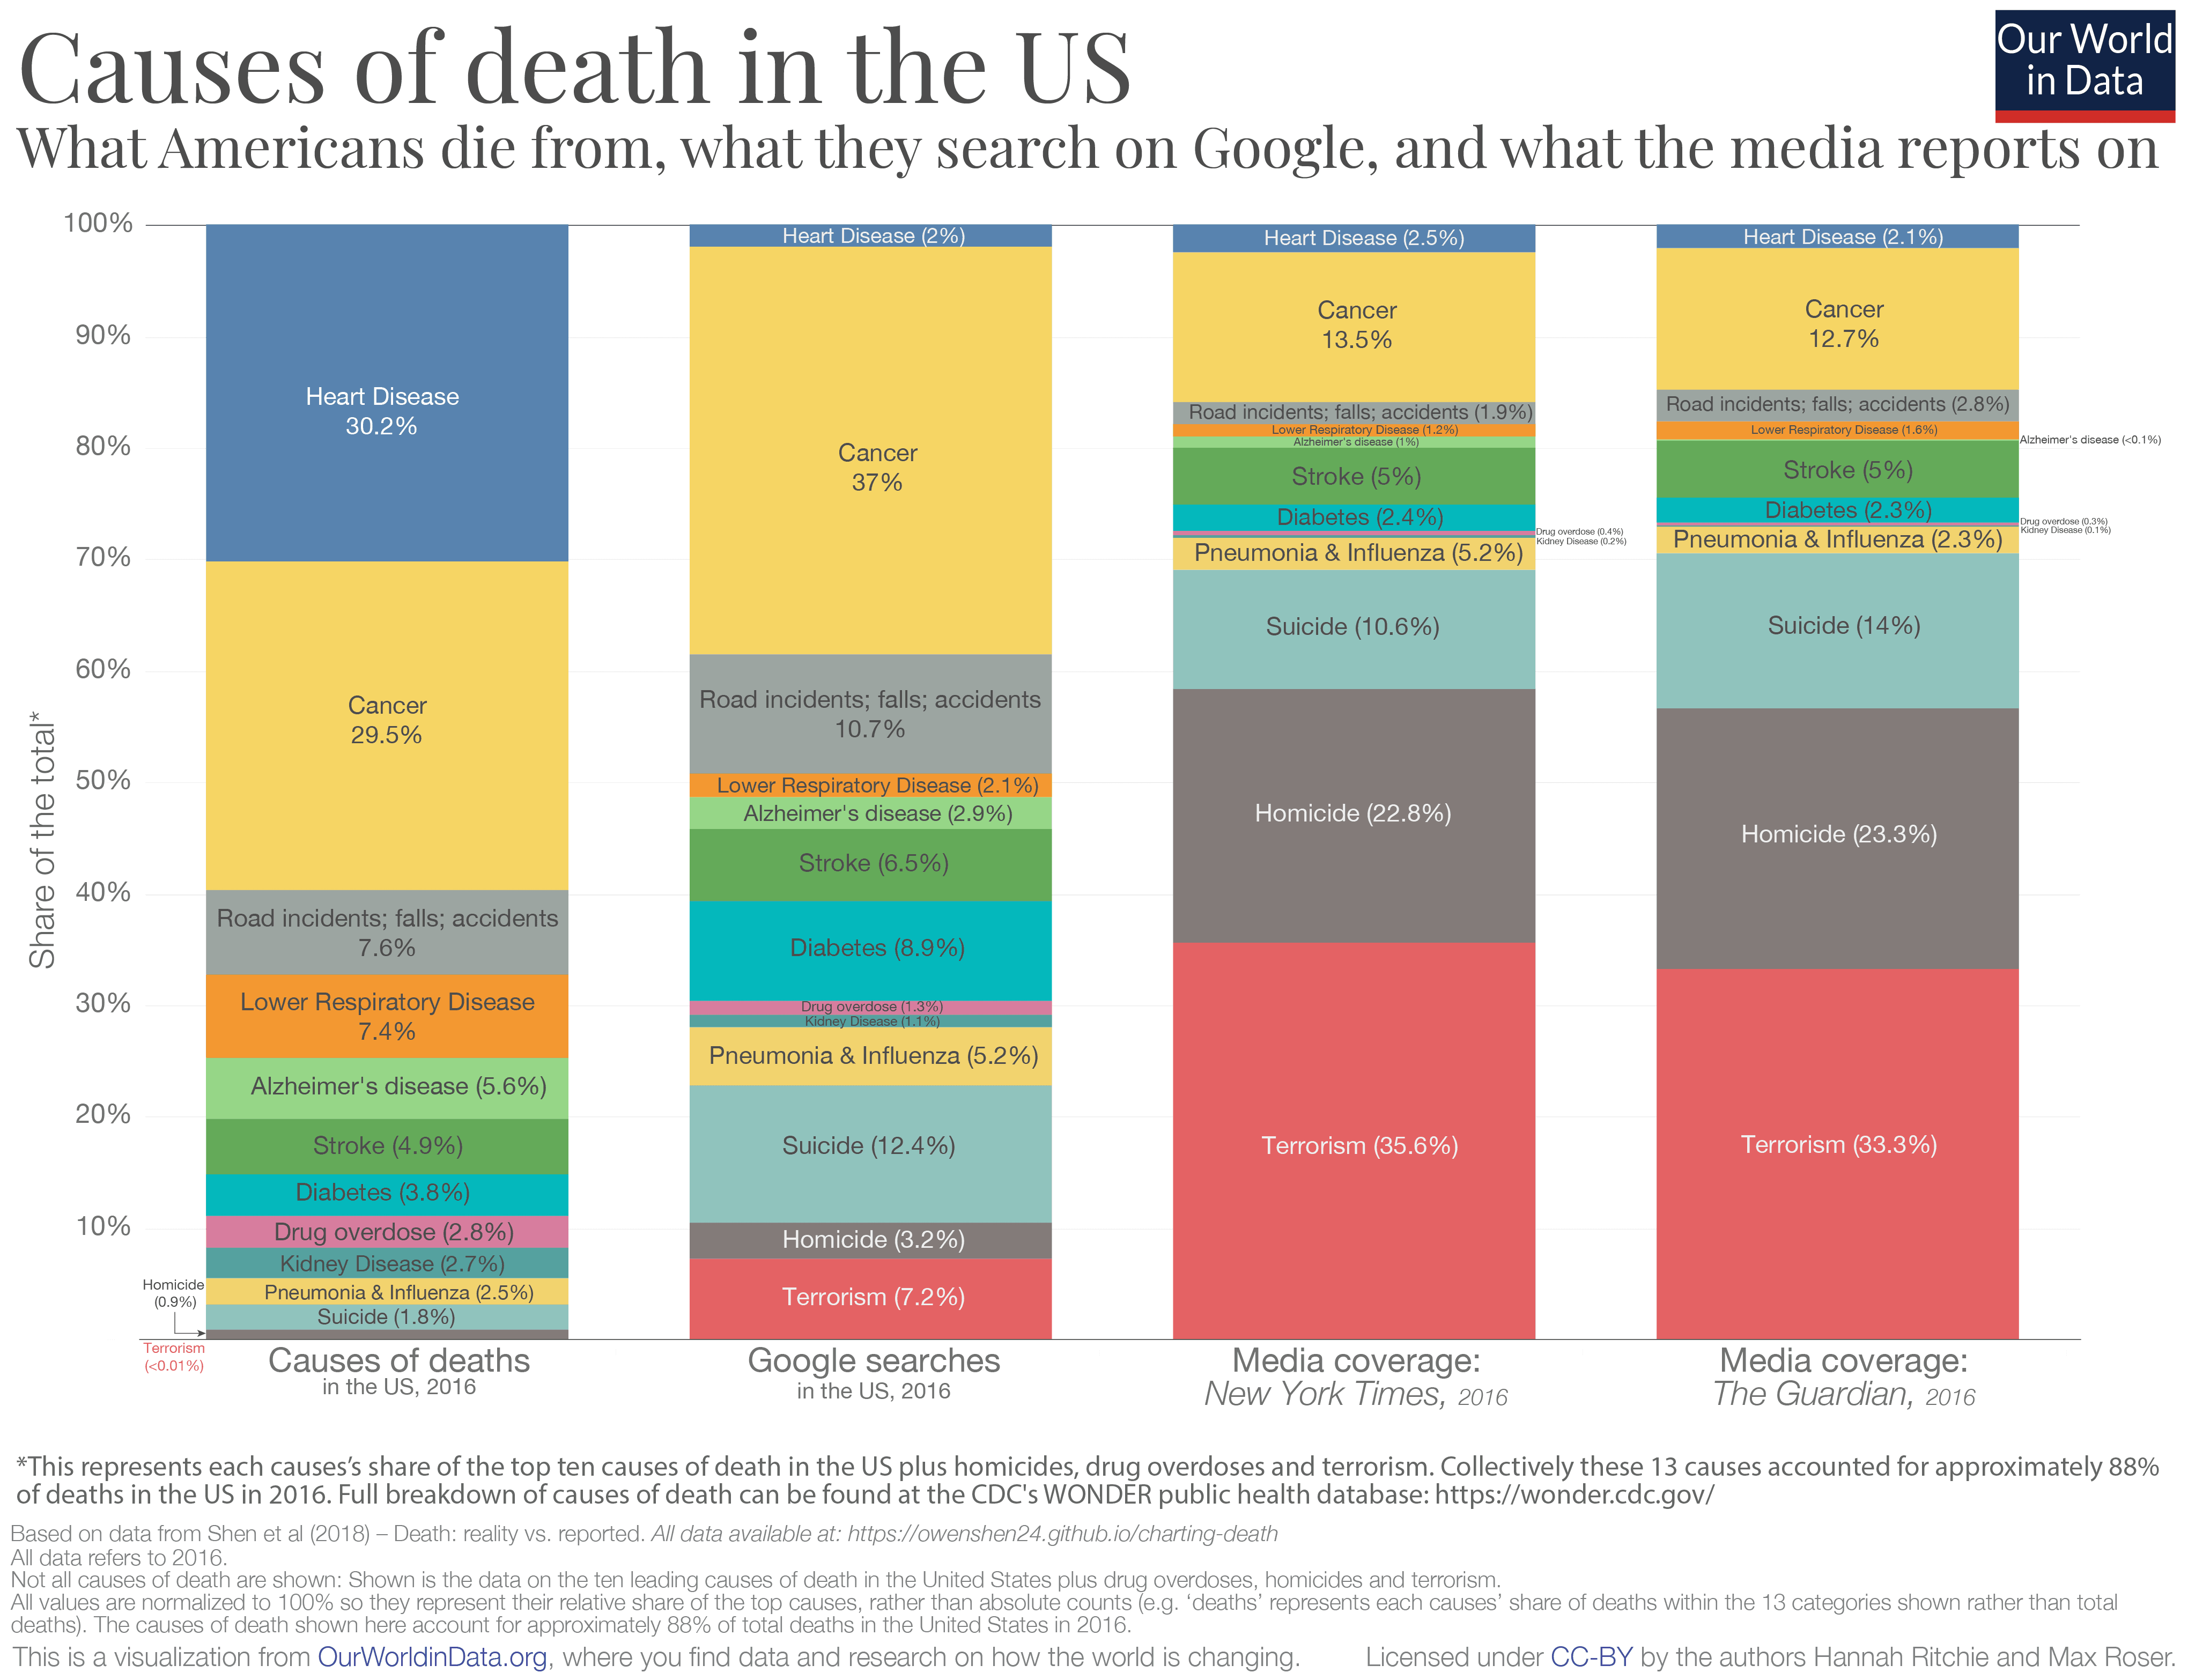 What the media reports people die from versus what people actually die from.